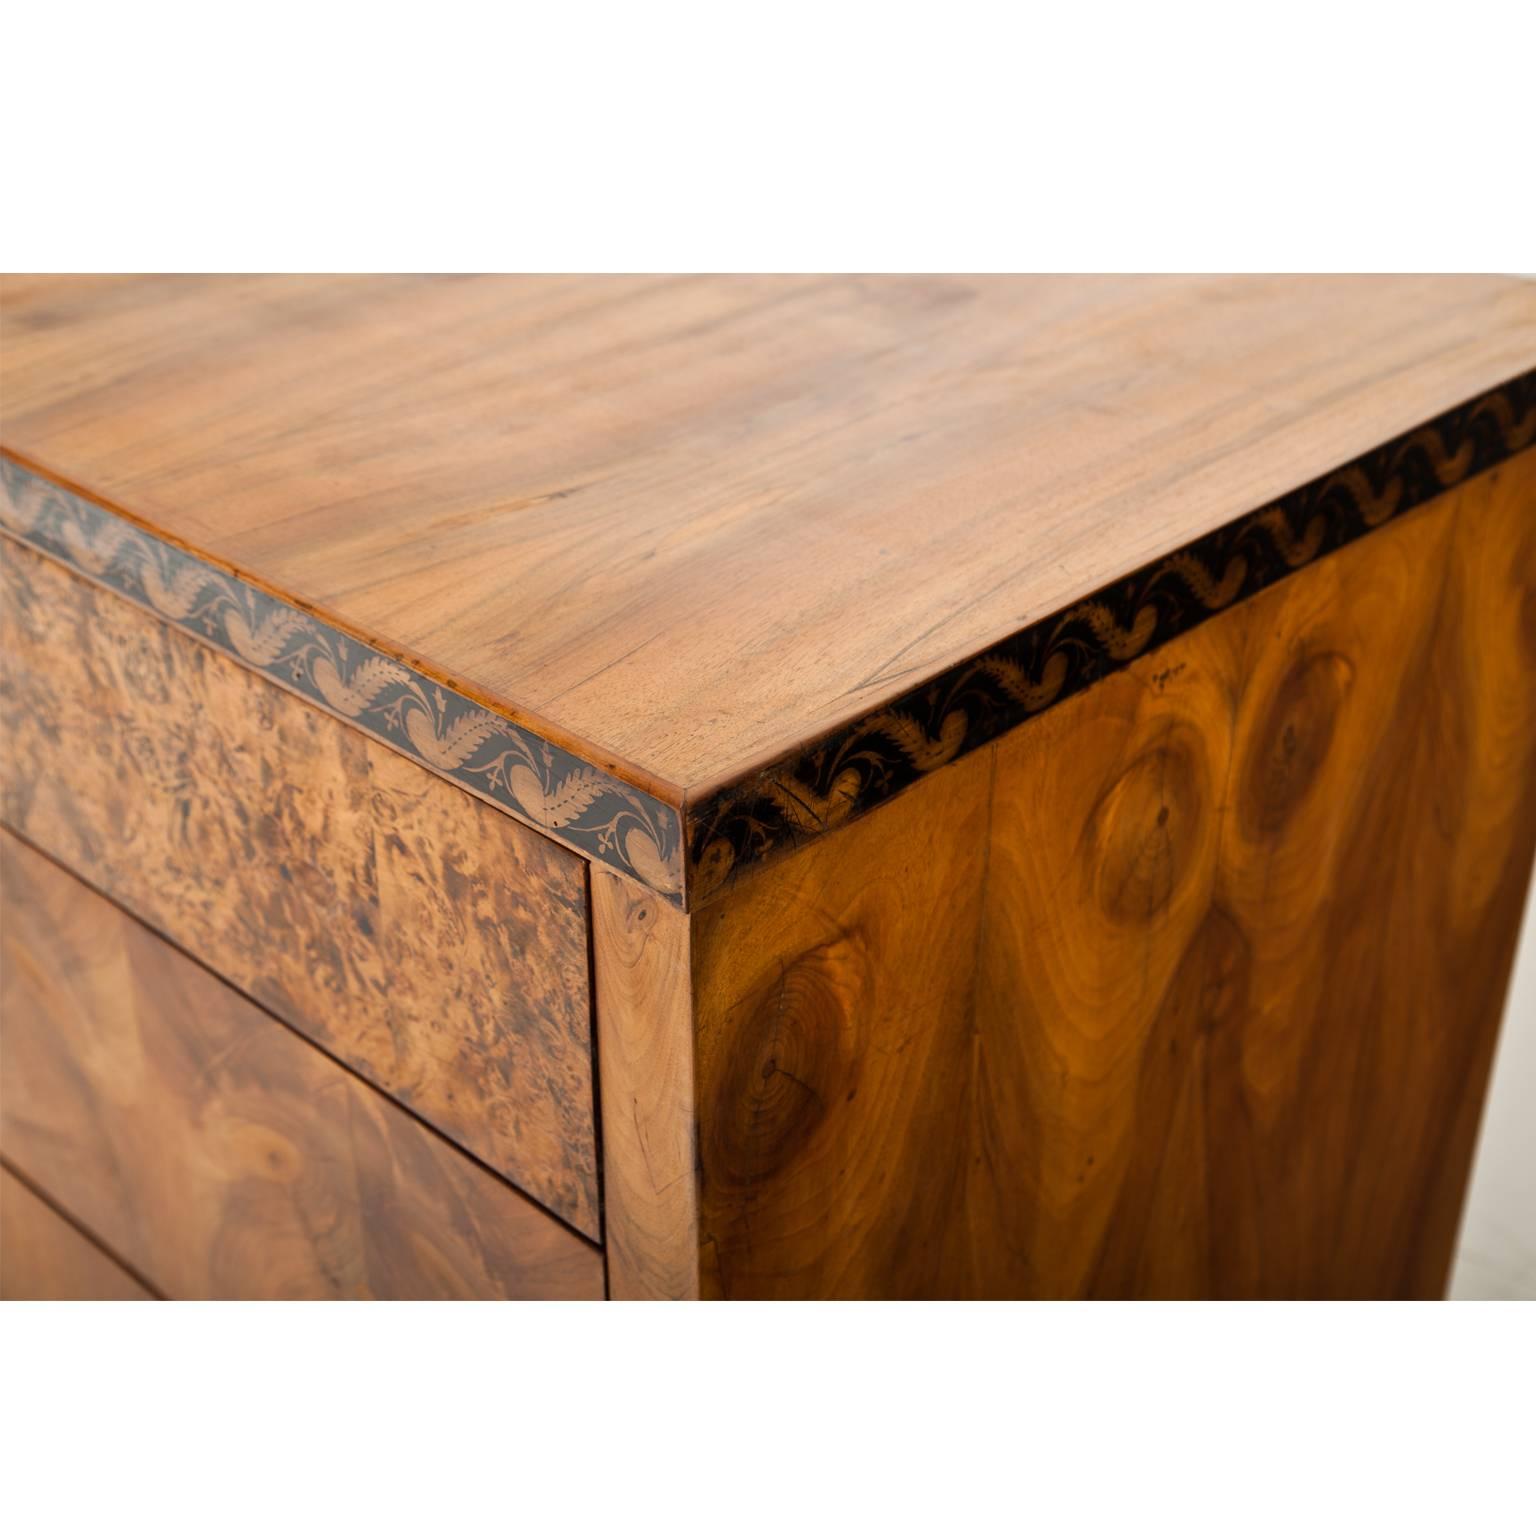 Three-drawered Biedermeier chest of drawers on tapered feet. The chests has a beautiful walnut veneer pattern and a revolving black ink ornament at the top edge.